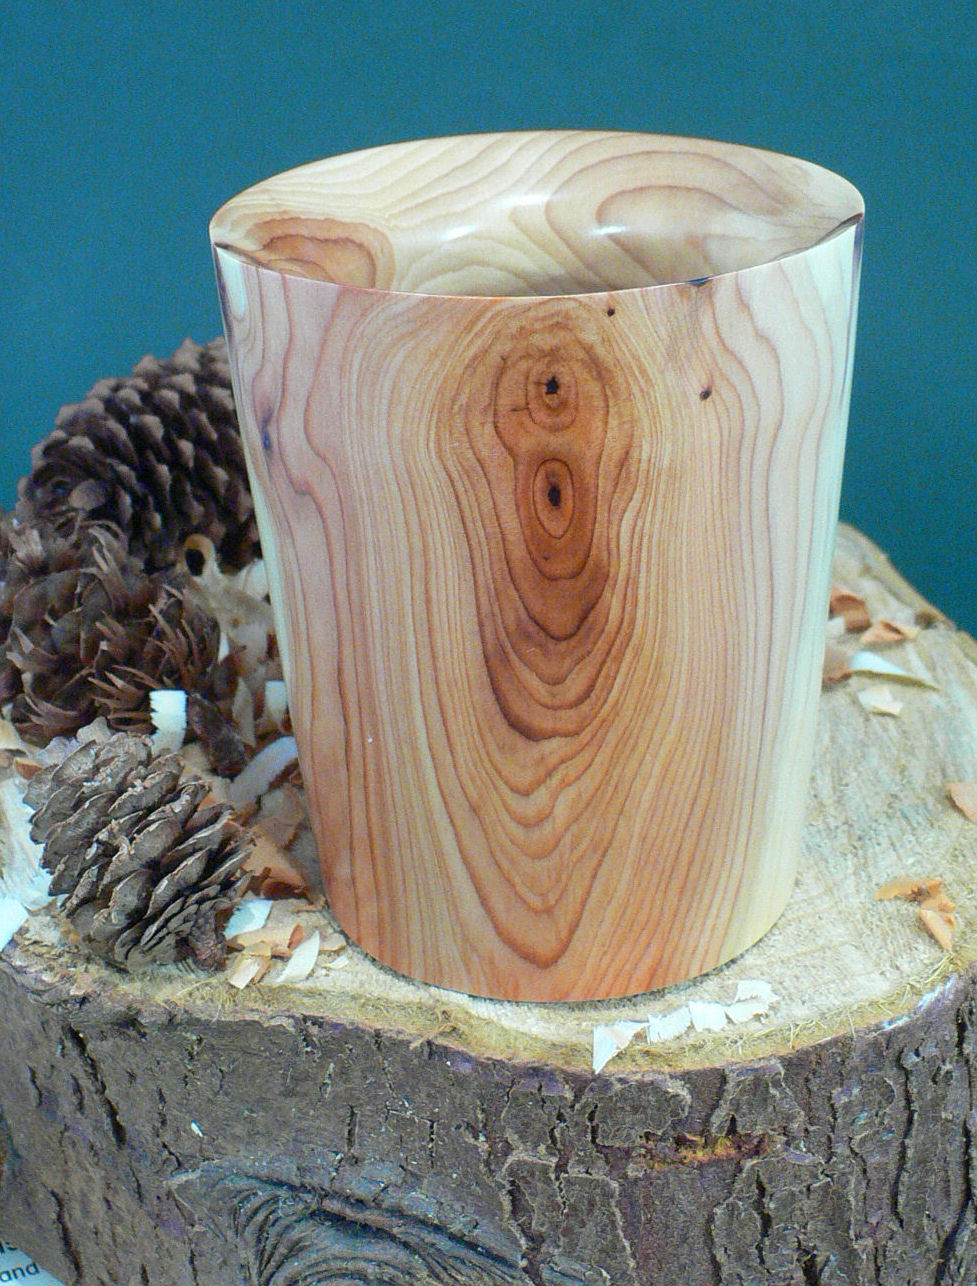 Wood art by Chris Rymer of Inside Out Wood Art made from - Yew